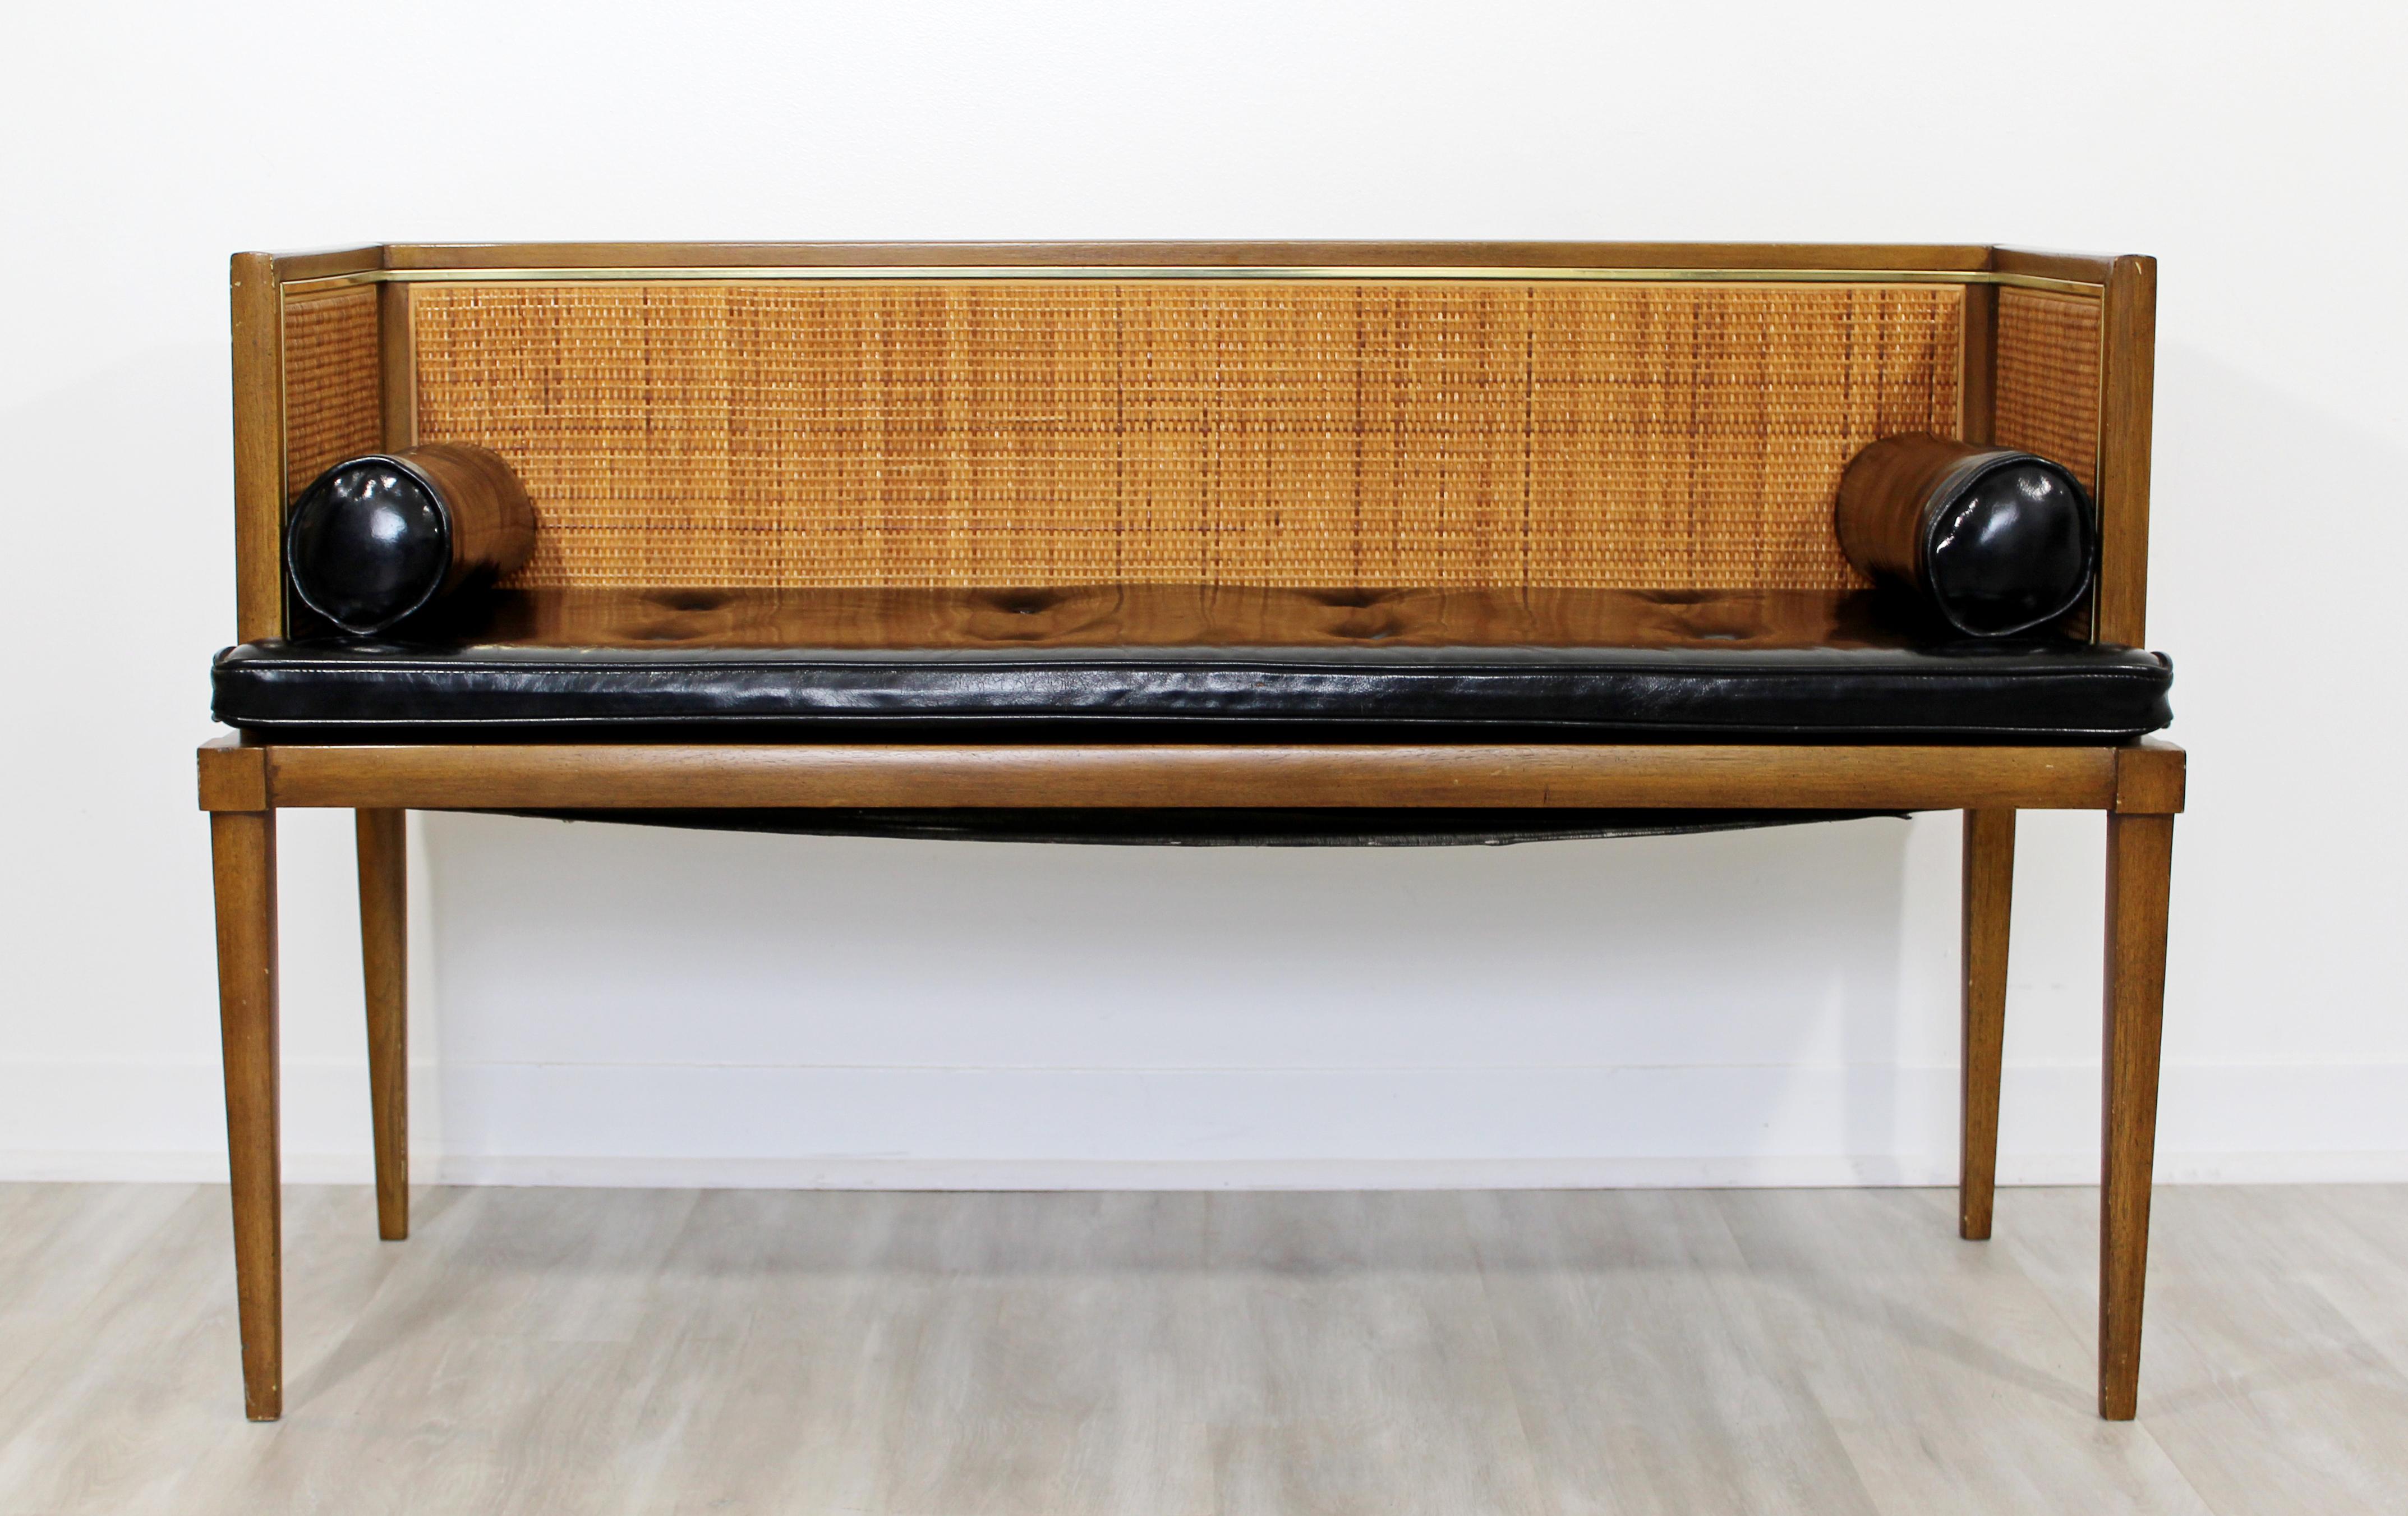 For your consideration is a remarkable, Danish style window bench seat, with a wood frame, cane back and arms, leather seat and brass accents, circa the 1960s. In very good vintage condition. The dimensions are 47